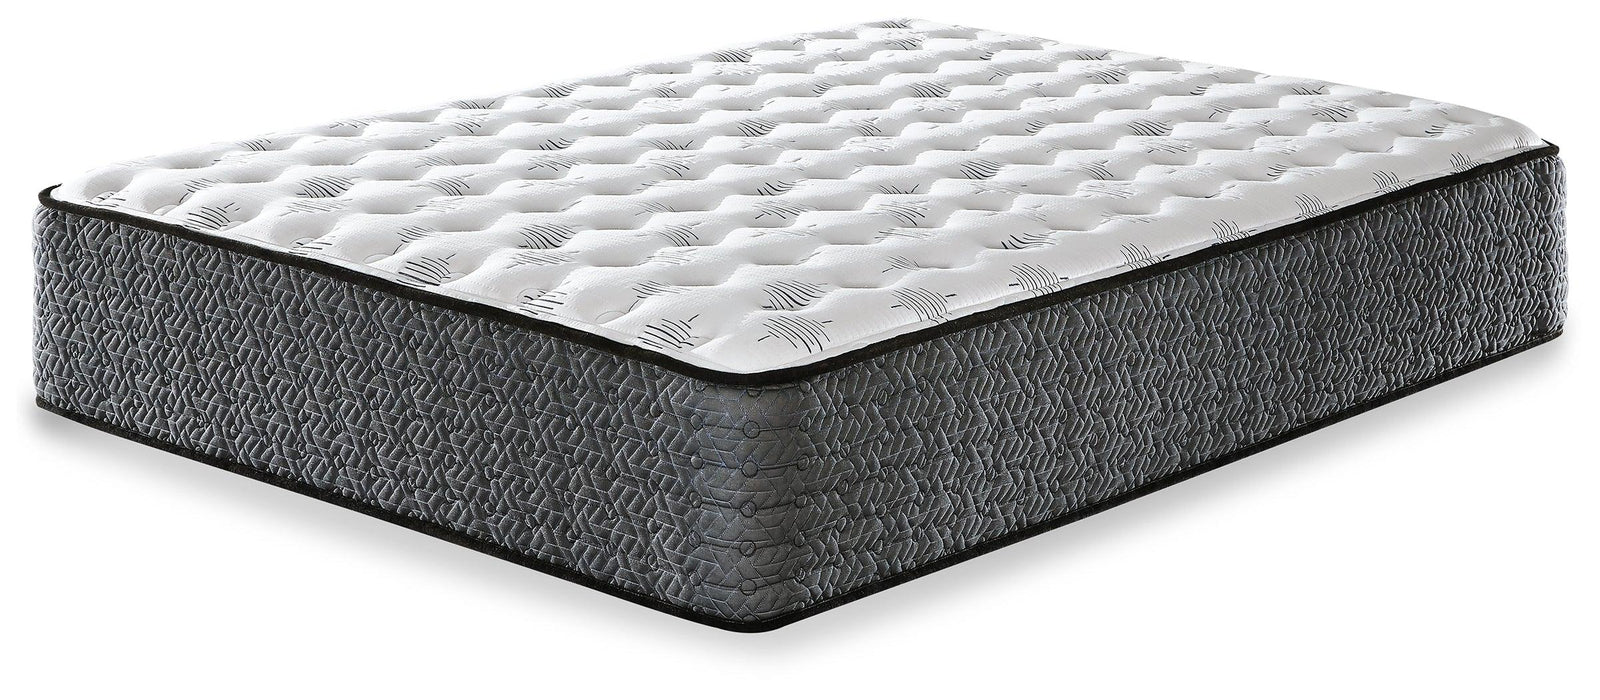 Ultra Luxury Firm Tight Top With Memory Foam White King Mattress